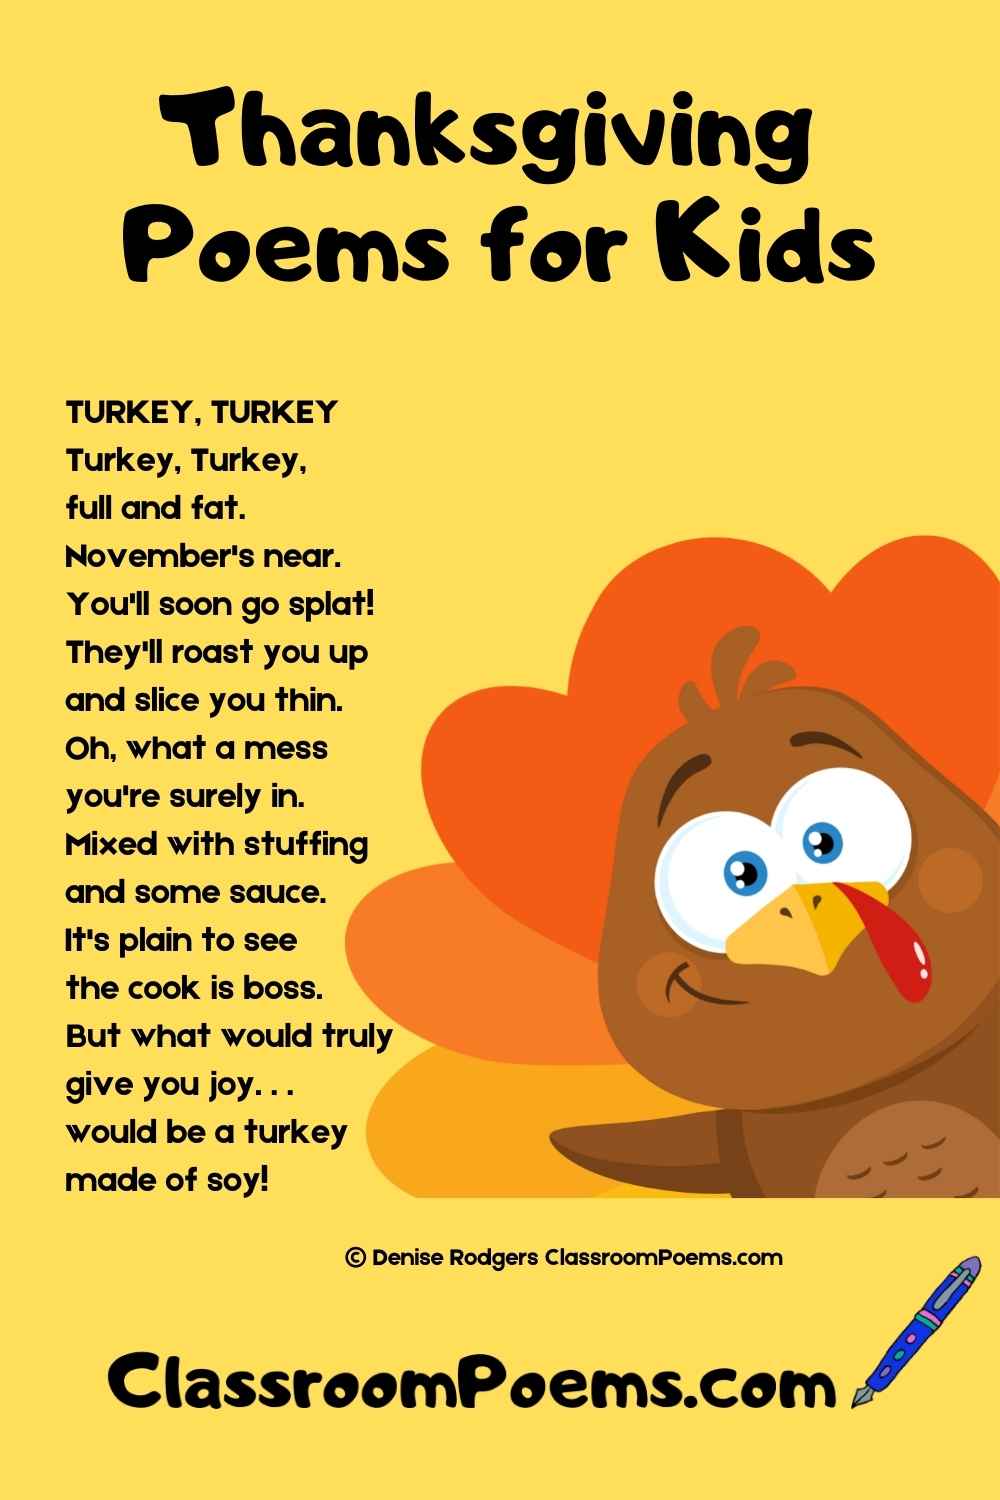 Enjoy these funny Thanksgiving poems! Read about dysfunctional families and several ways to have Thanksgiving -- with and without a turkey!